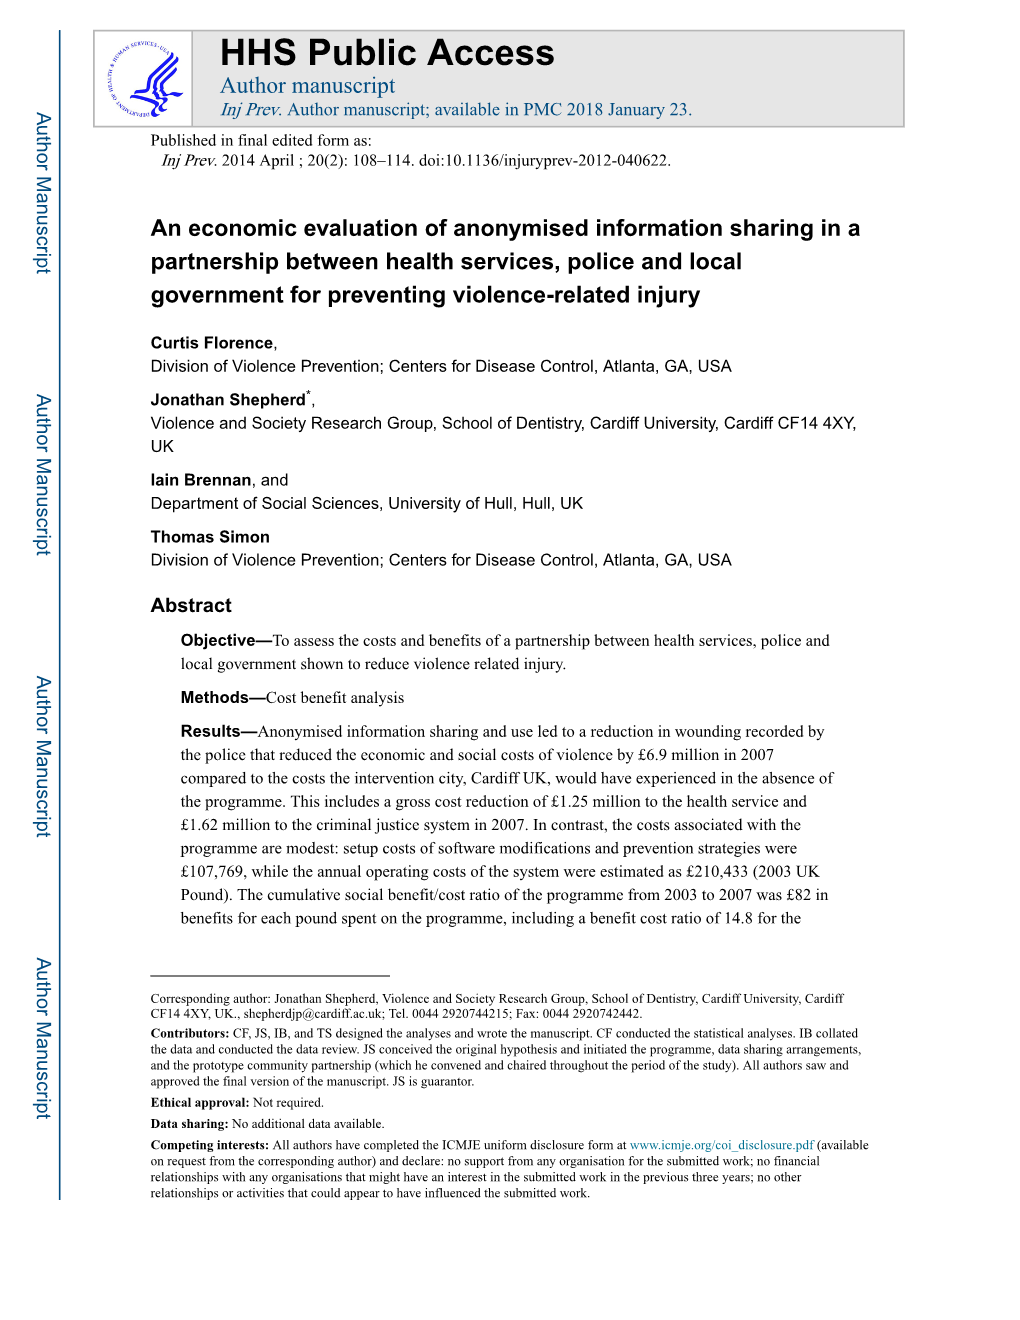 An Economic Evaluation of Anonymised Information Sharing in a Partnership Between Health Services, Police and Local Government for Preventing Violence-Related Injury